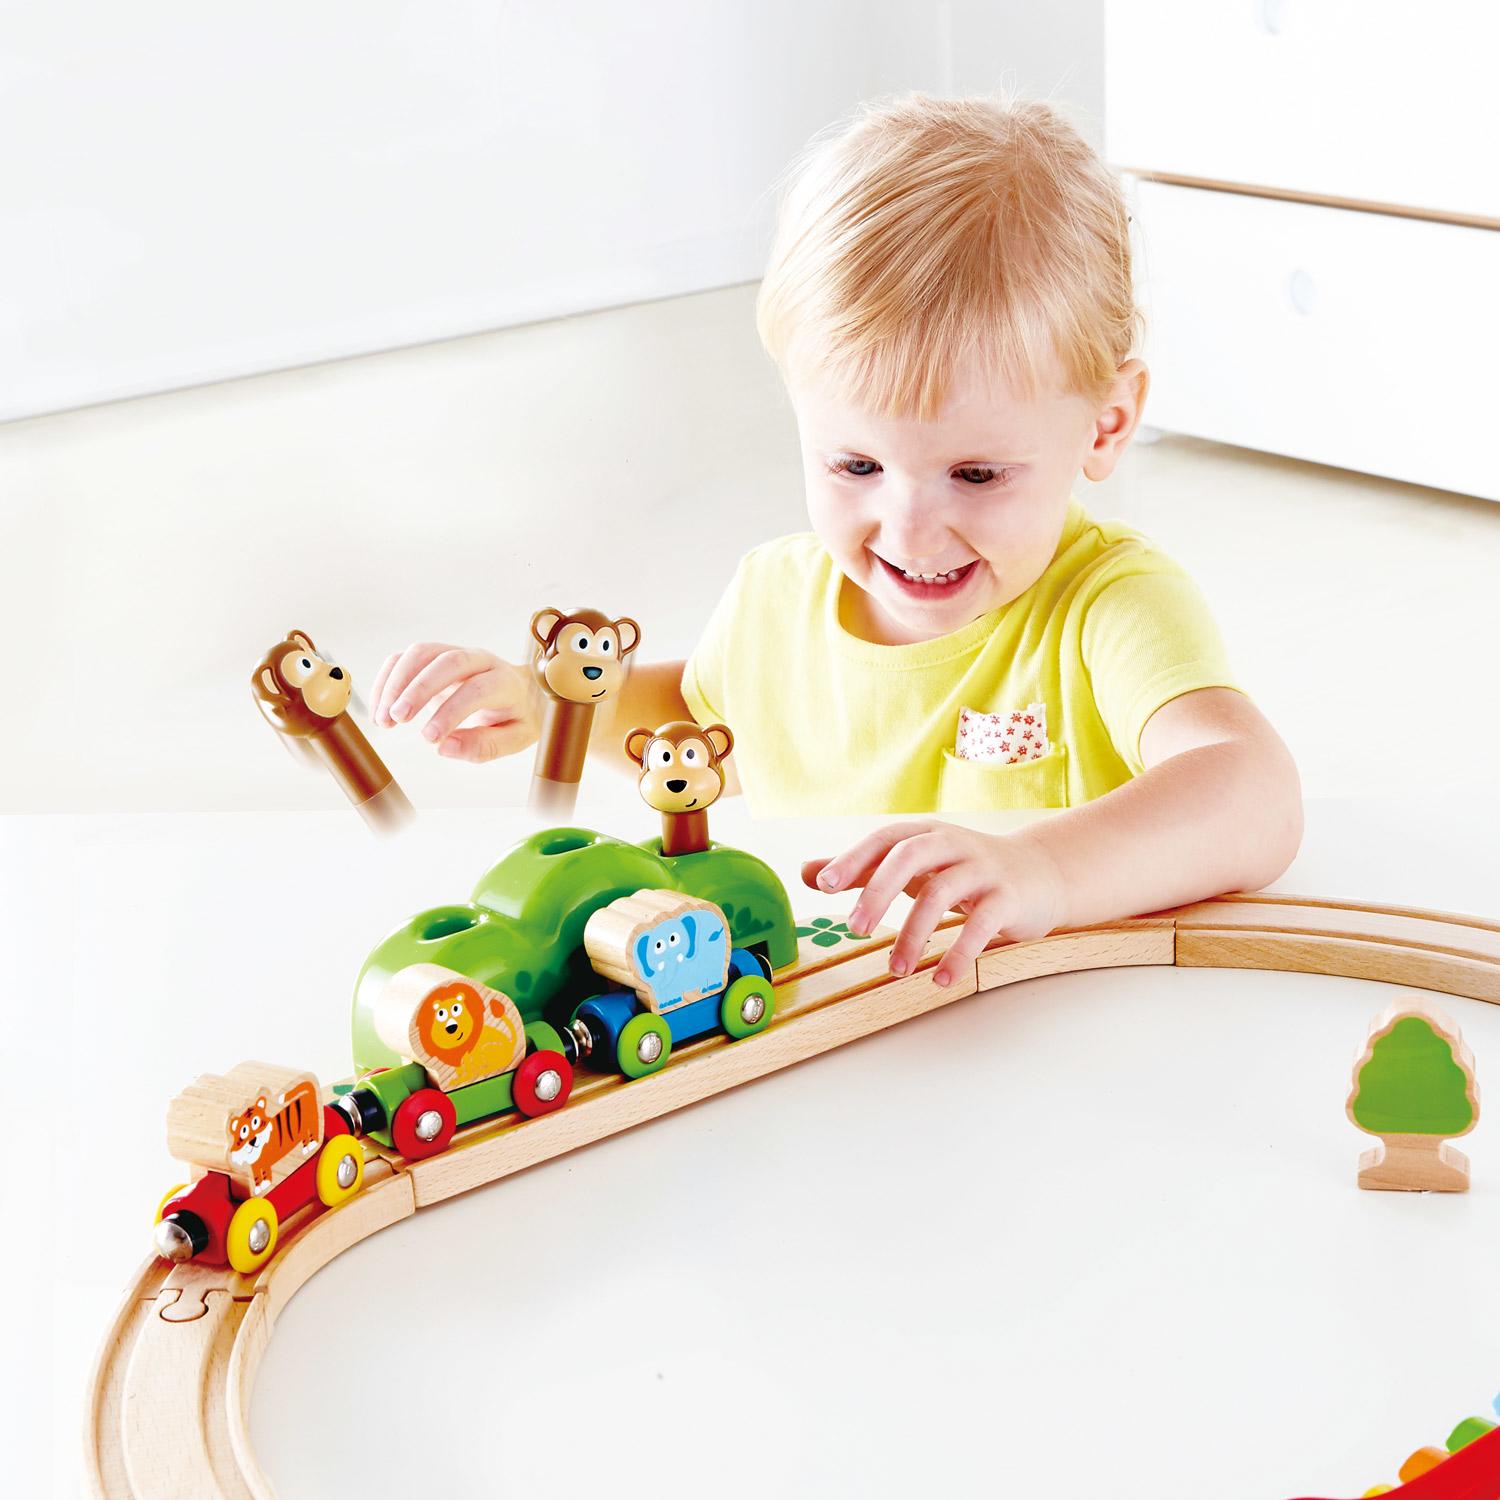 Child playing with jungle animals on a train with monkey pieces that pop up as the train goes by.